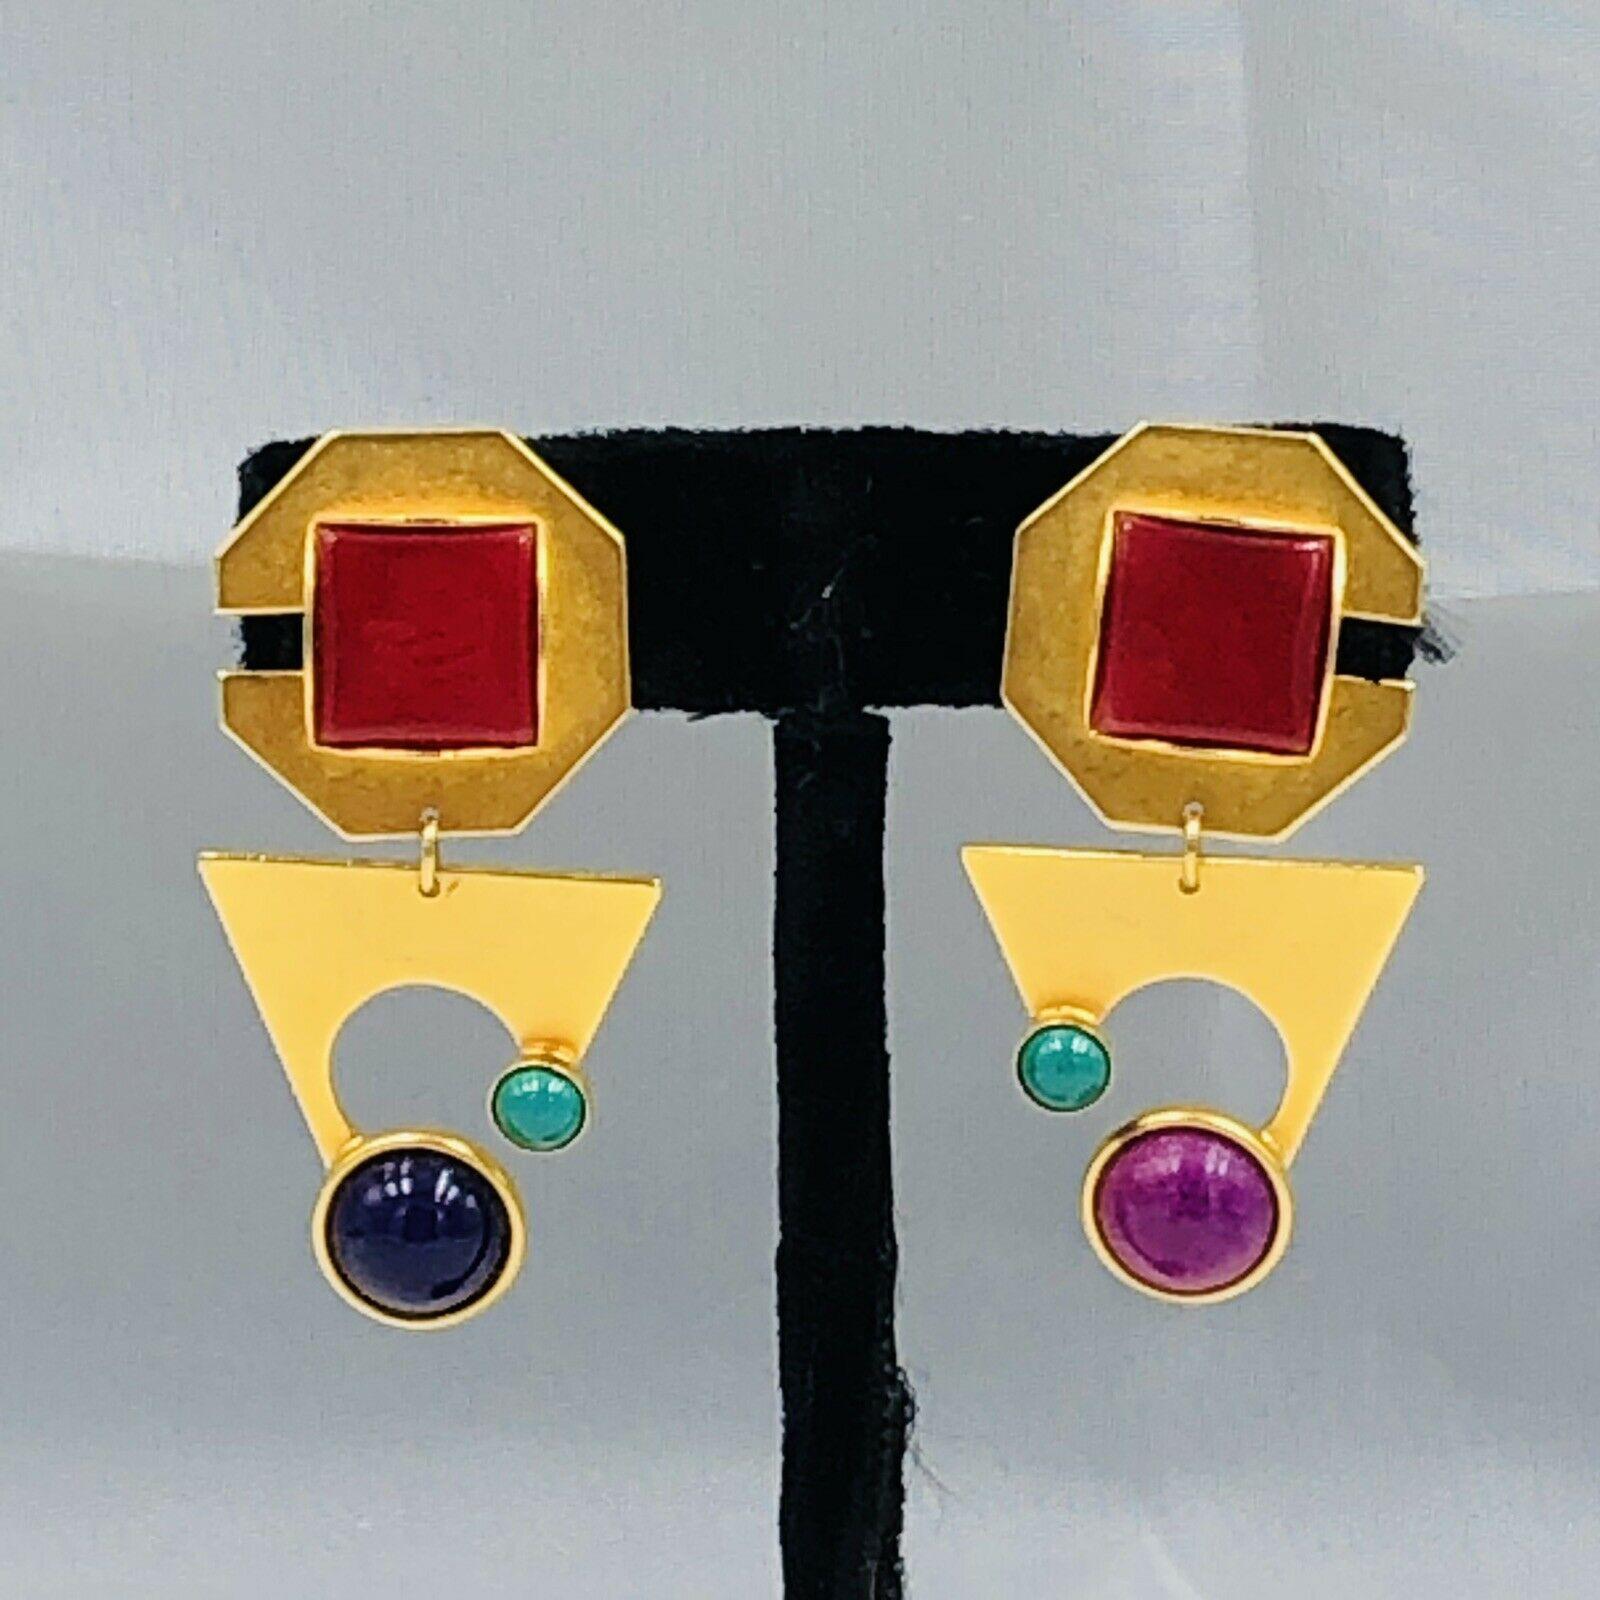 Fabulous Signed Gale Rothstein Designer Modernist Faux Multi-Gem Dangle Earrings. Striking Abstract design. Measuring approx. 2” long. Signed on the back: Gale Rothstein. More Beautiful in real time...Sure to be admired complement to your outfit! 
